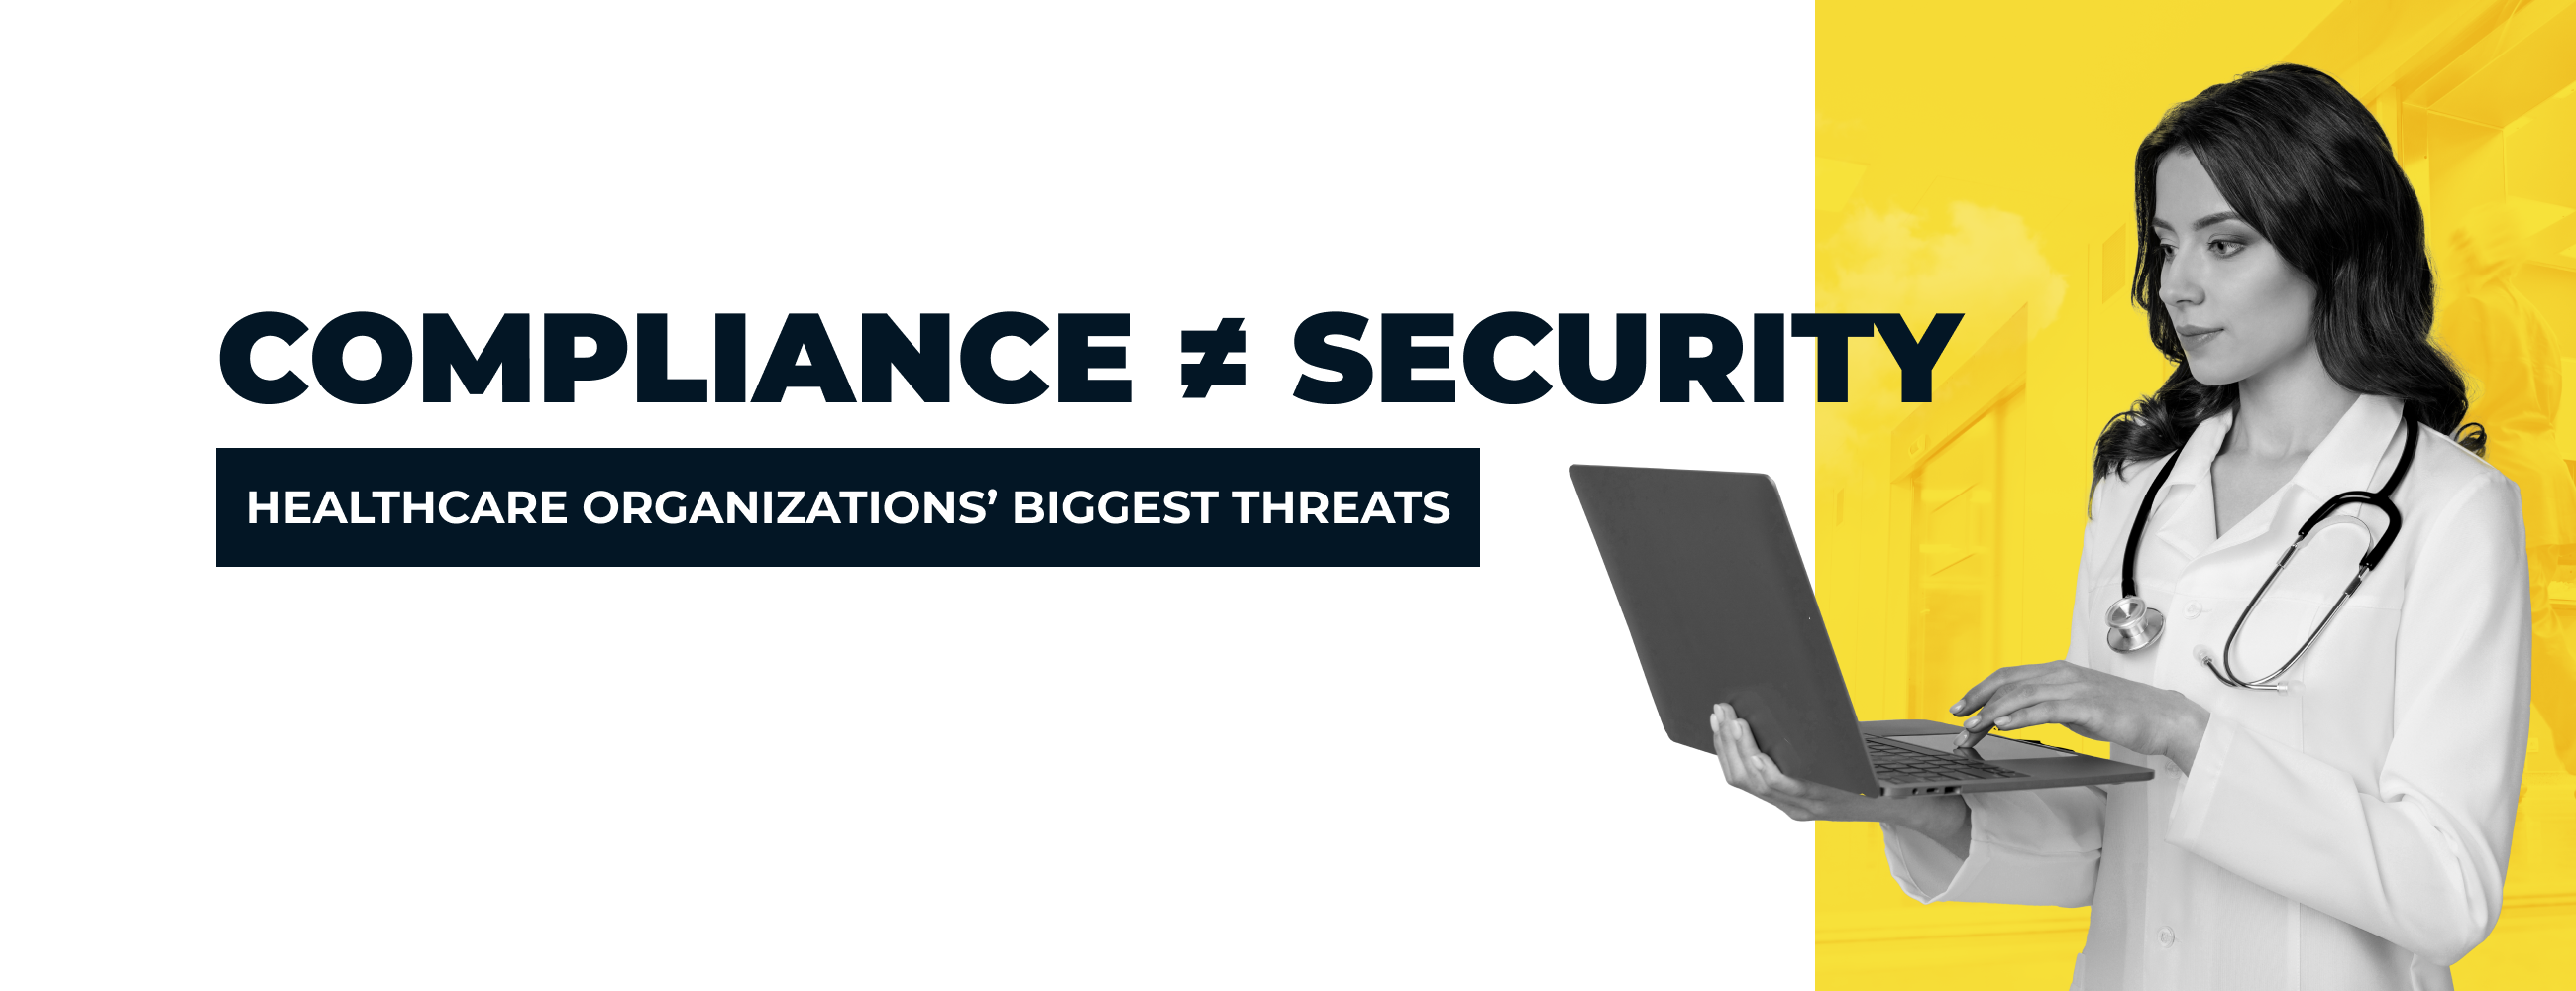 Compliance ≠ Security: Healthcare Organizations’ Biggest Threats